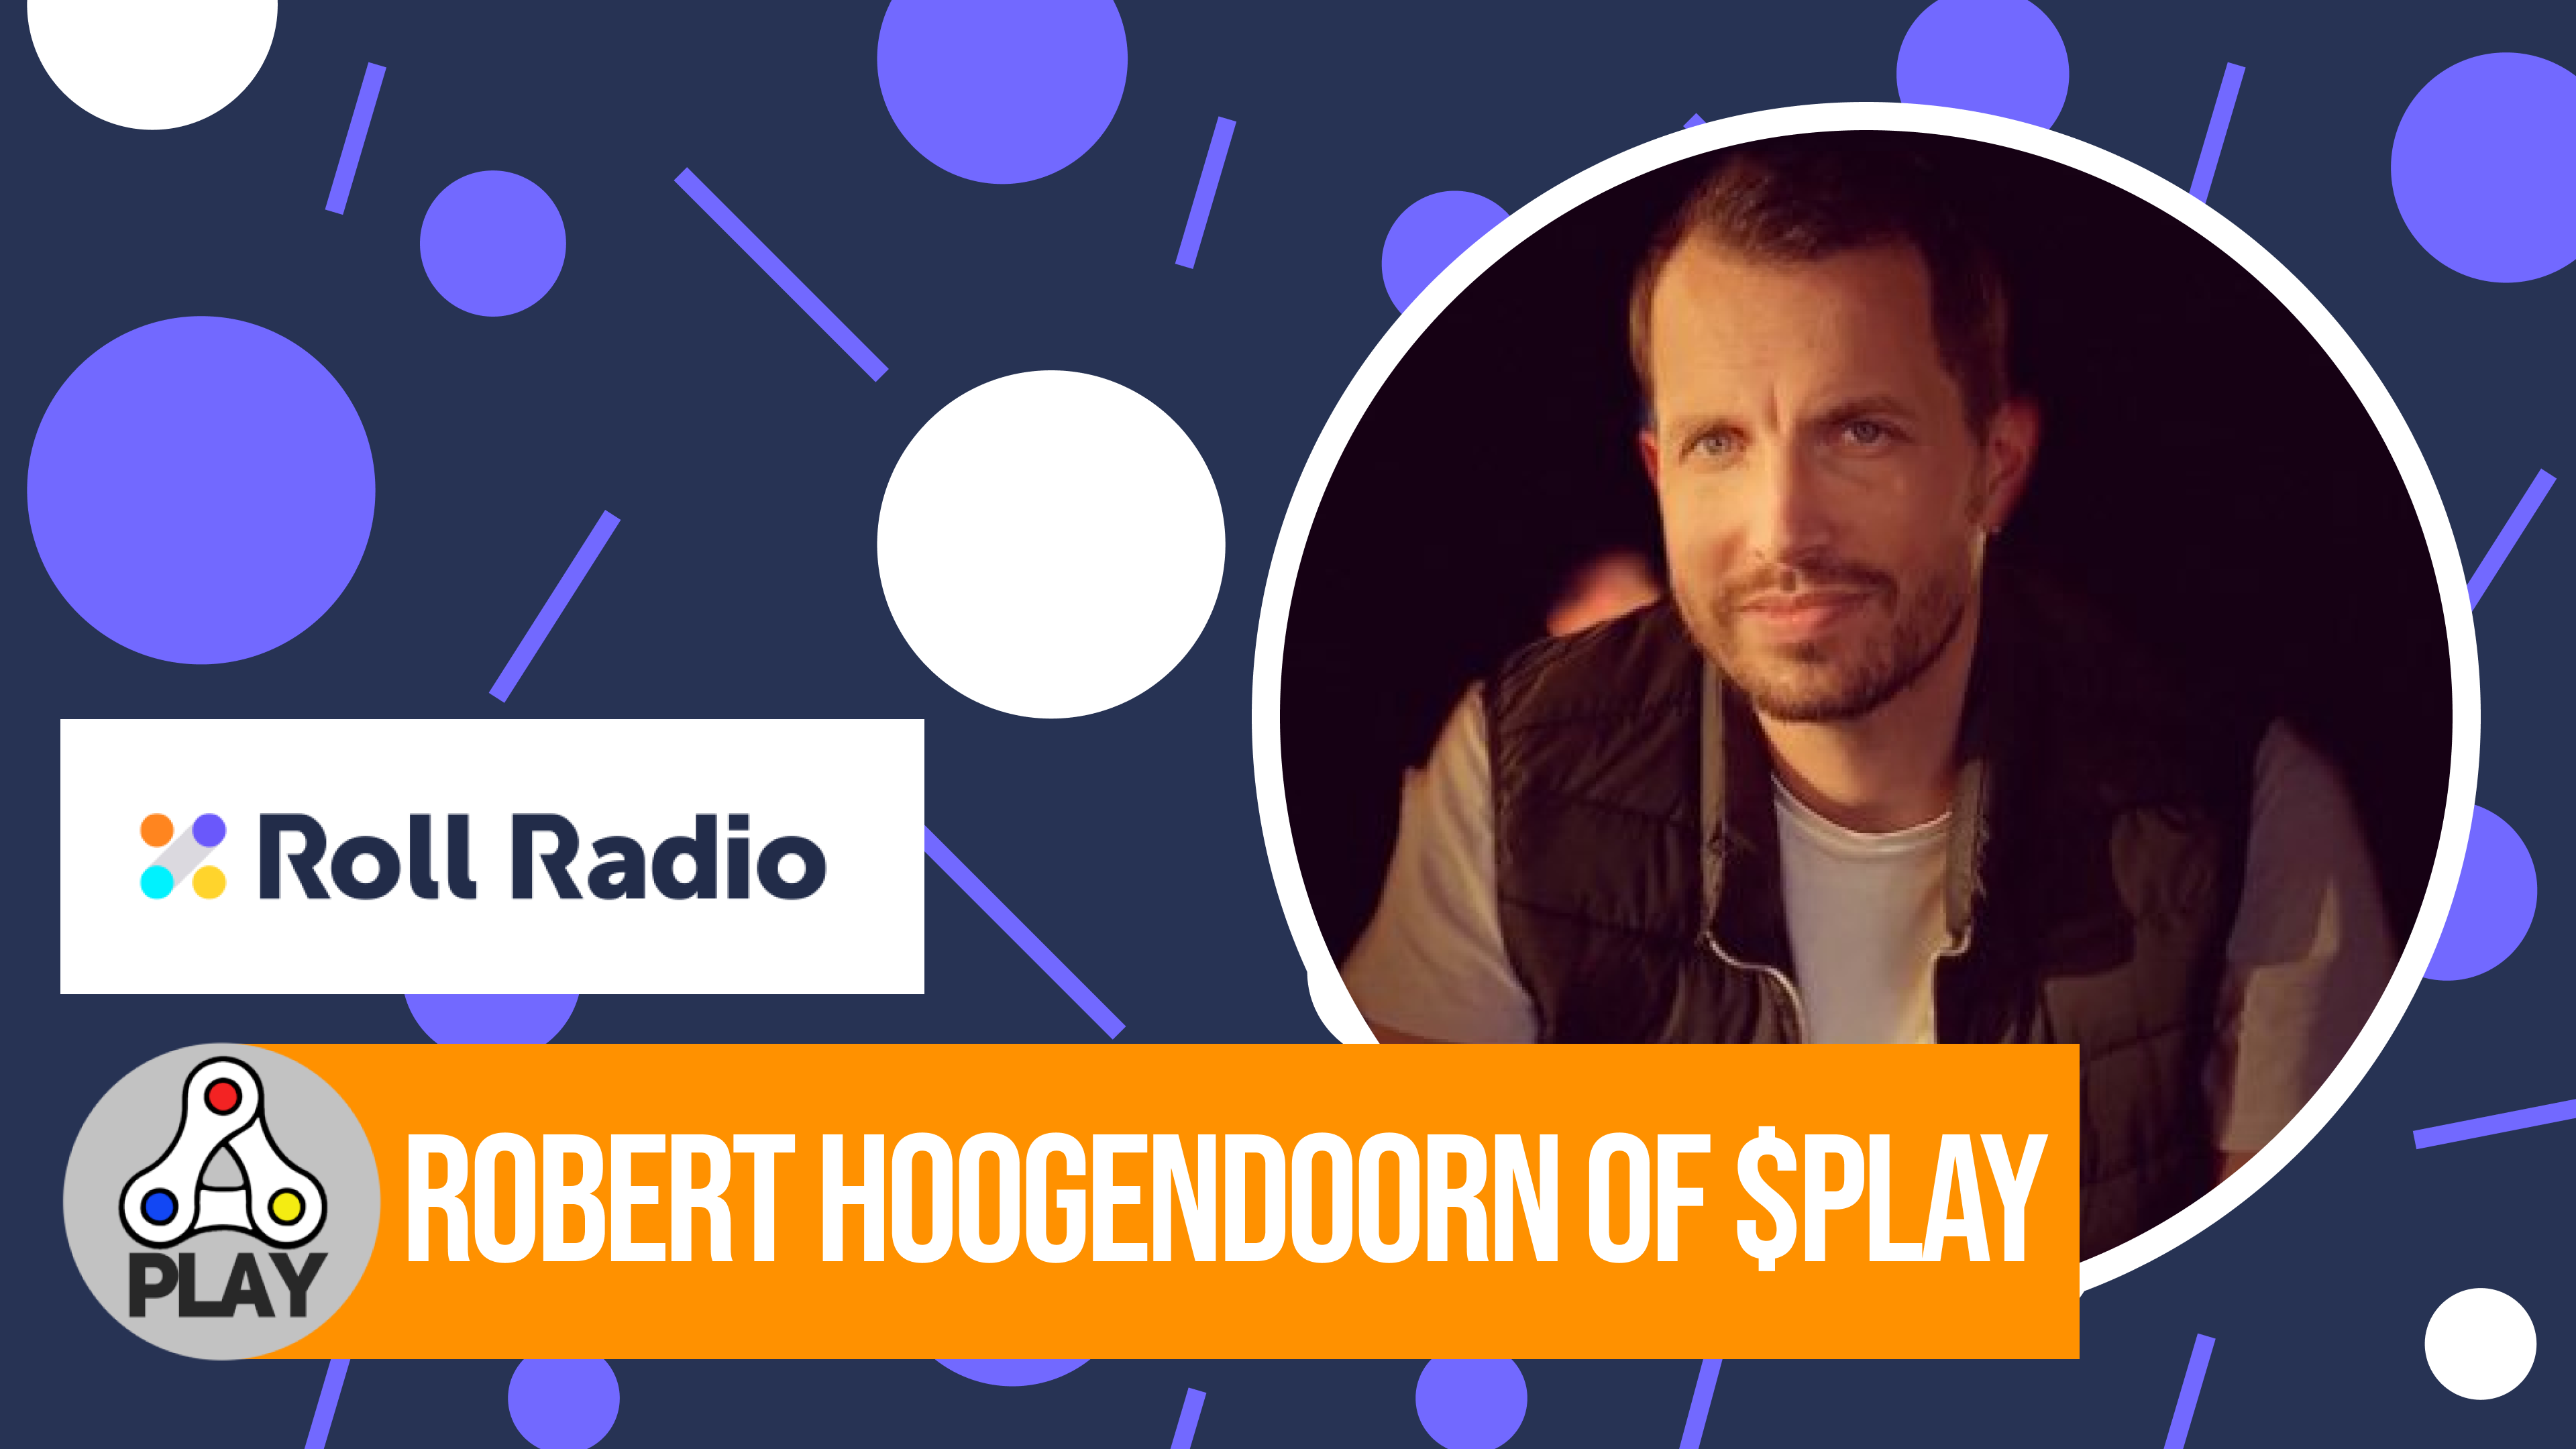 Roll Radio E020: Play-to-earn games and social money with Robert Hoogendoorn